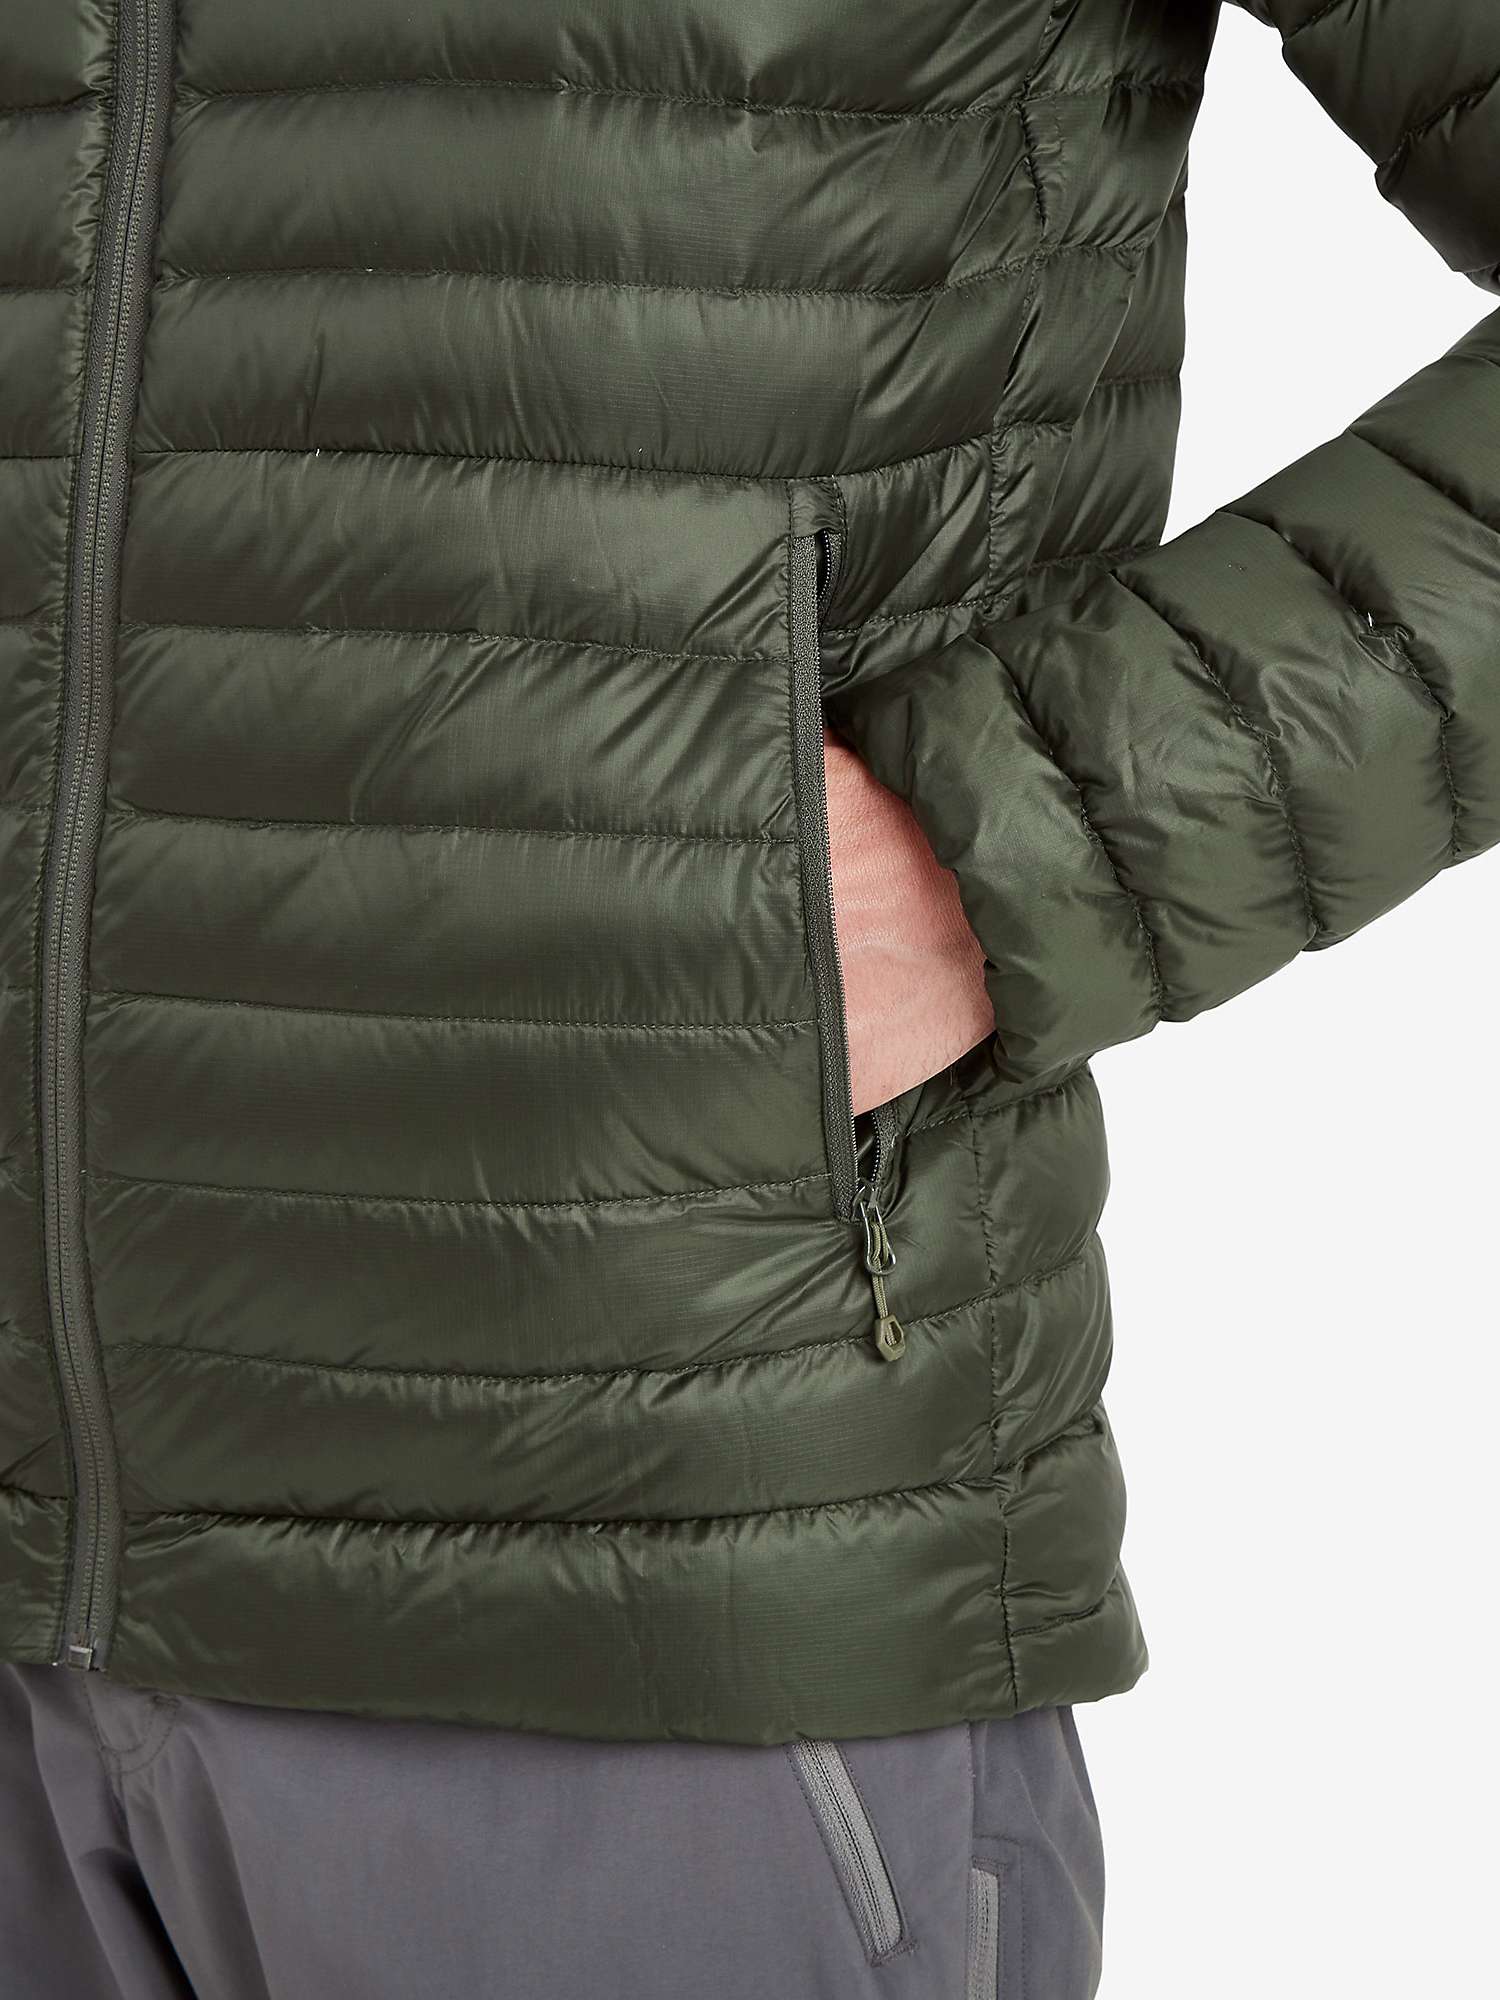 Buy Montane Anti-Freeze Men's Recycled Packable Down Jacket Online at johnlewis.com